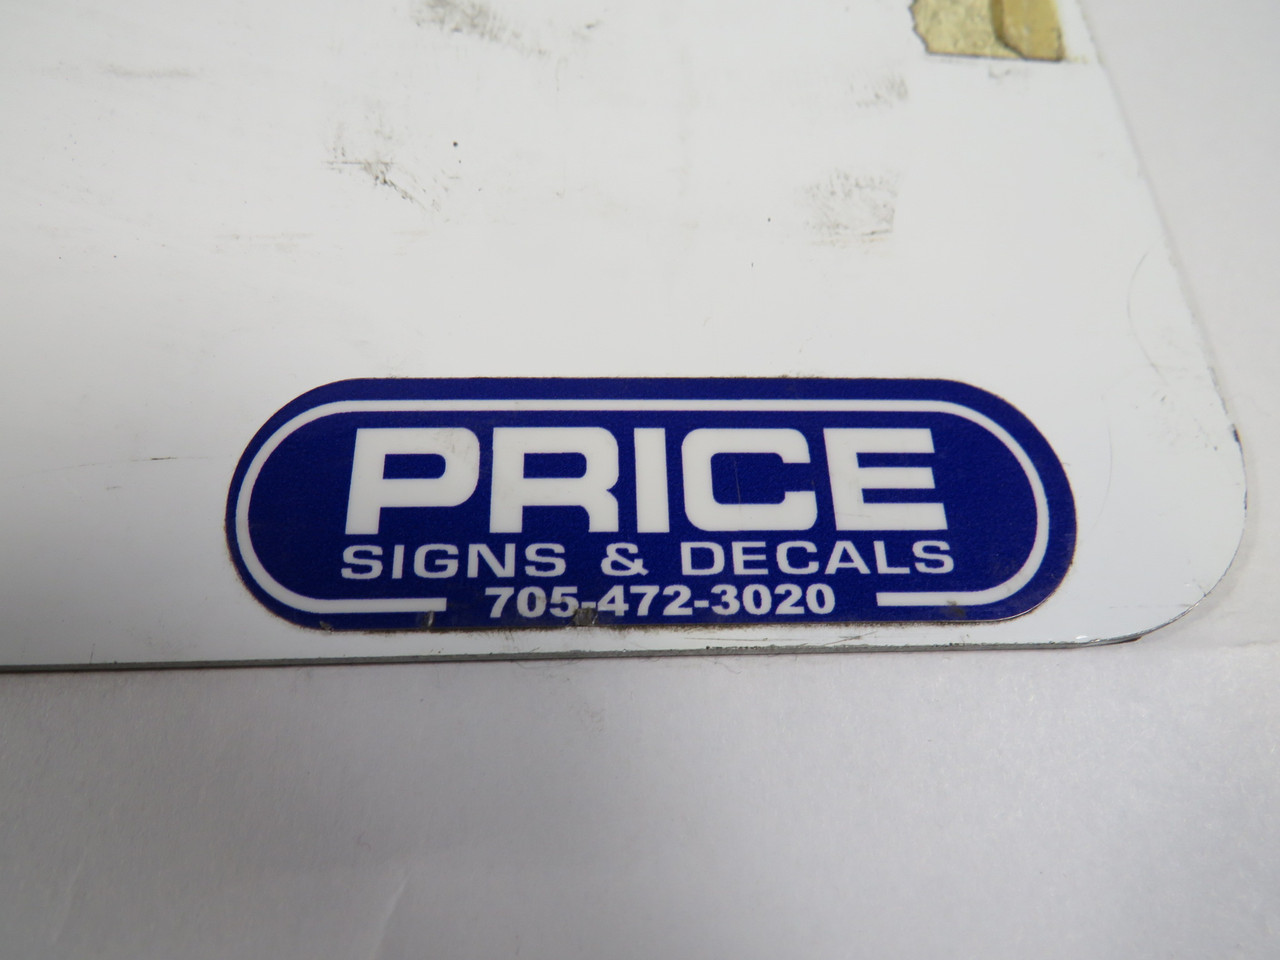 Price No Parking Sign 24x18" Cosmetic Damage USED